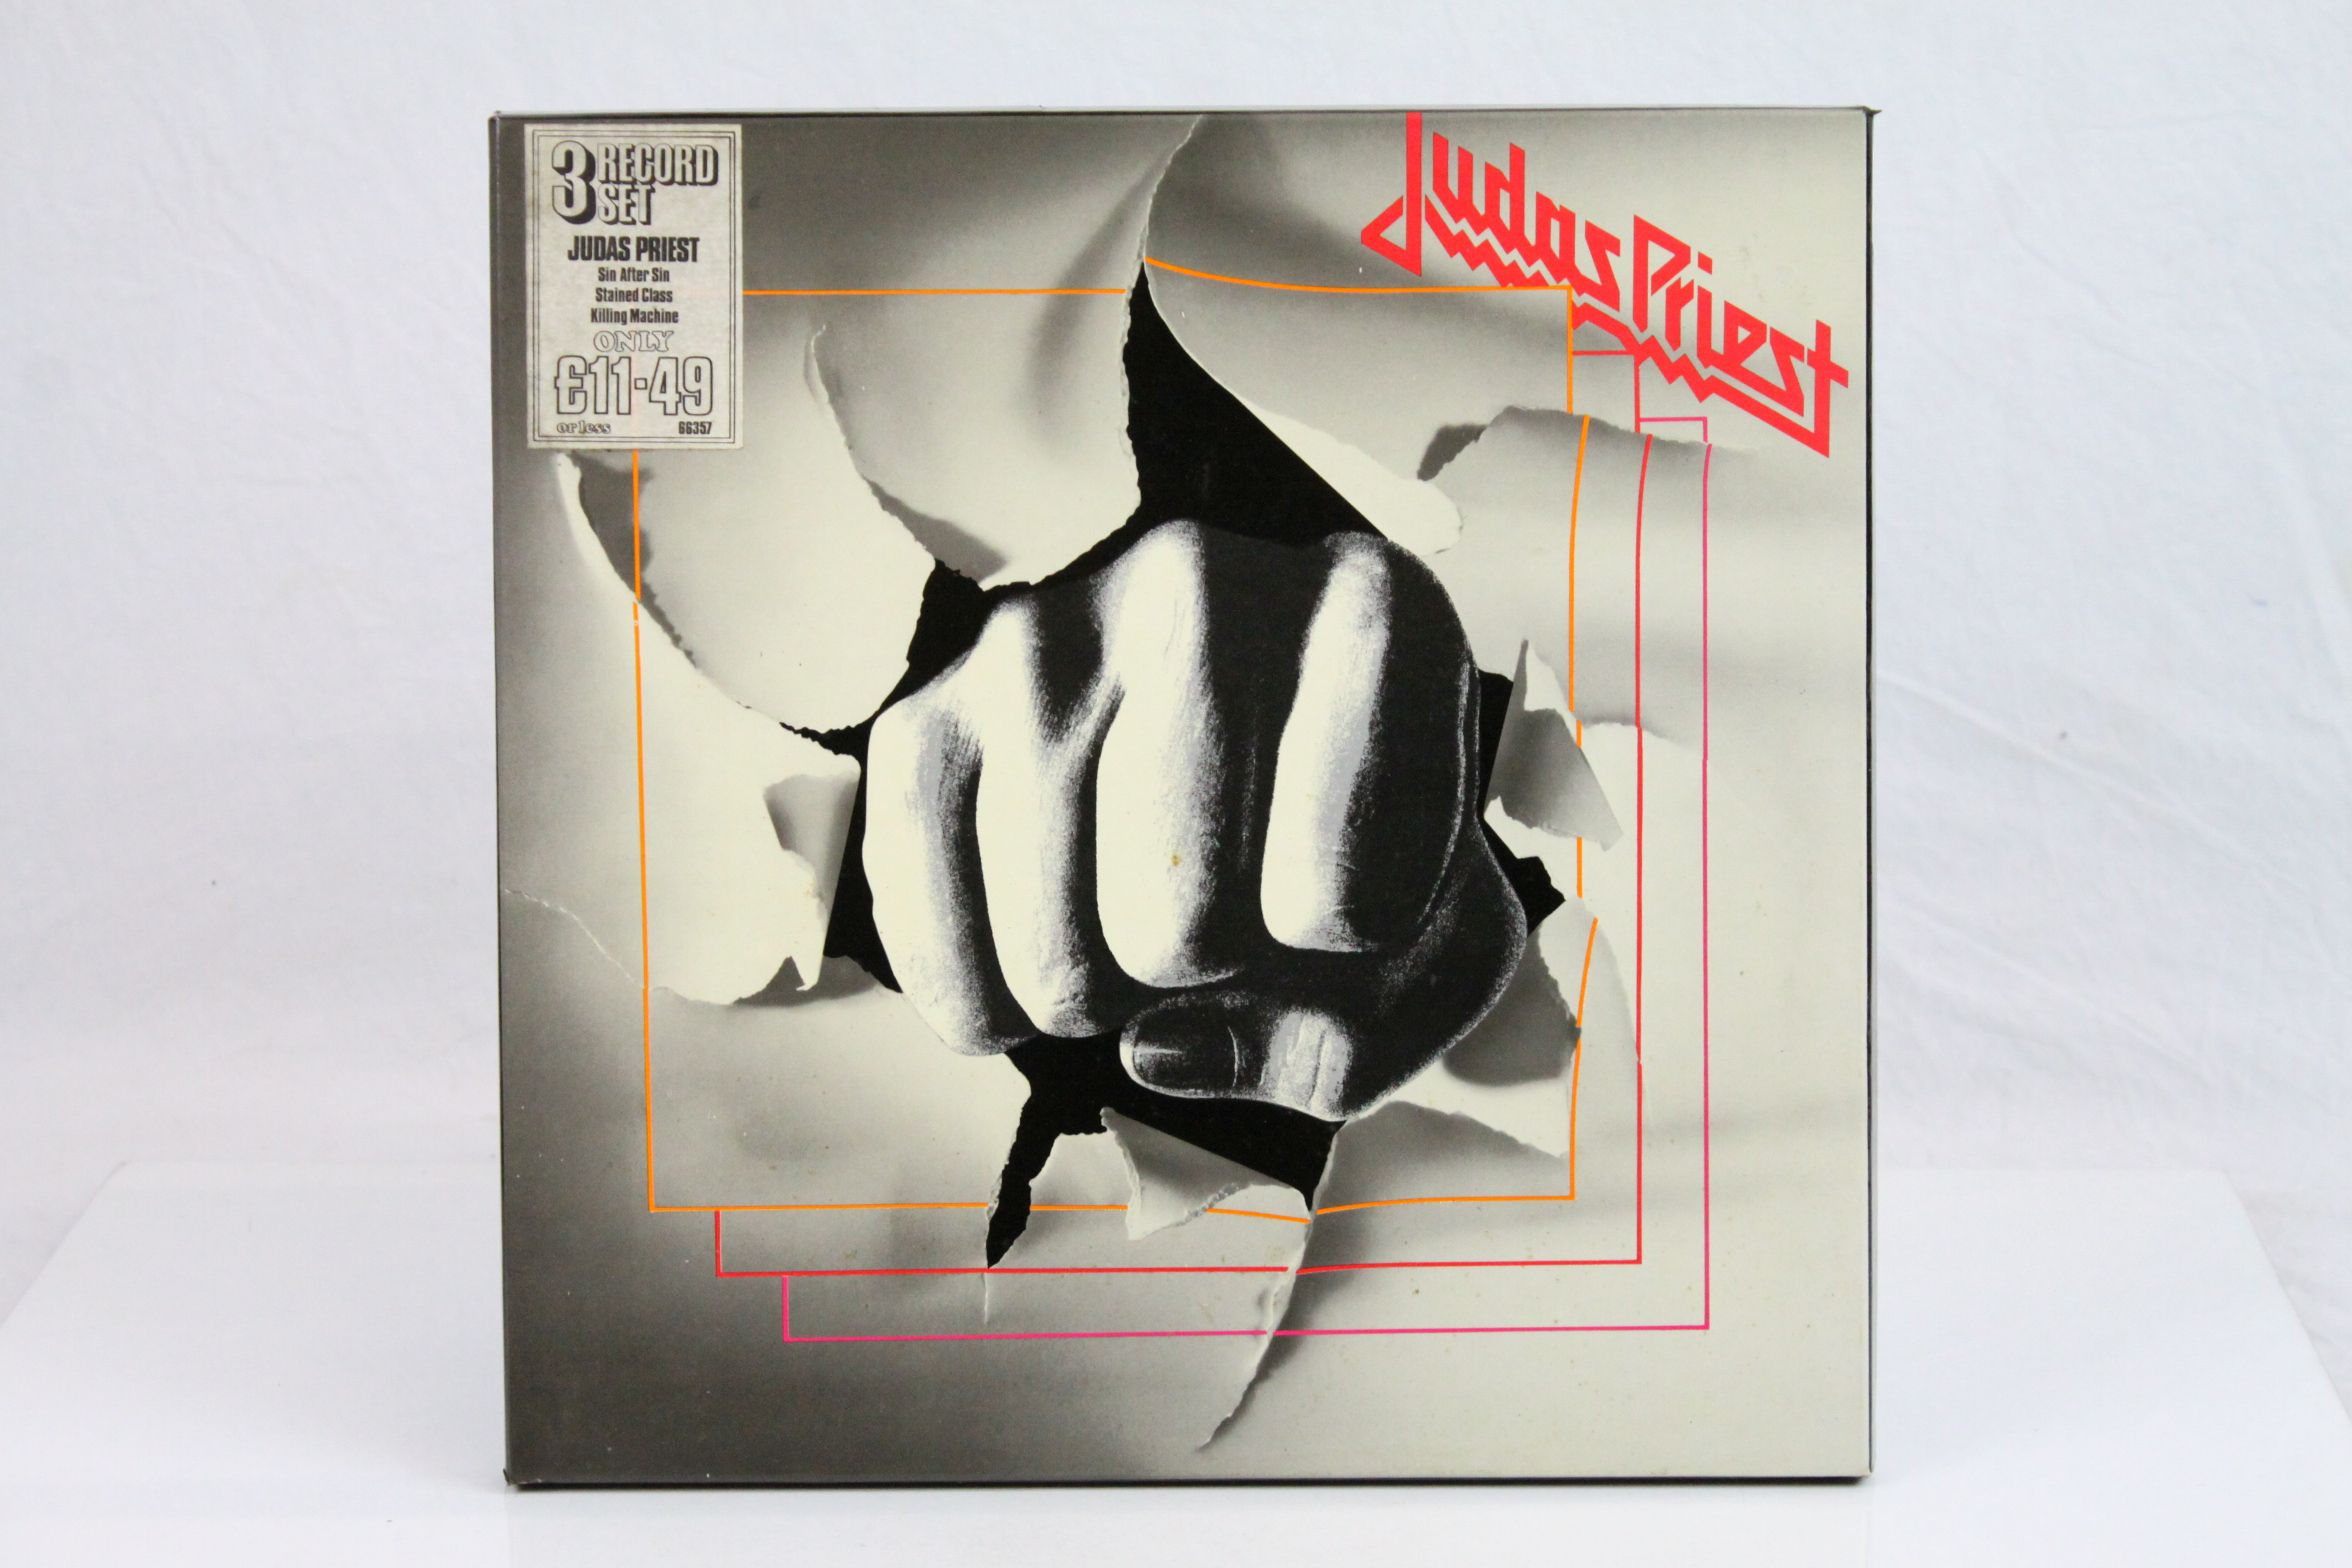 Vinyl - Judas Priest 3 LP Box Set on CBS 66357 featuring Sin After Sin, Stained Glass and Killing